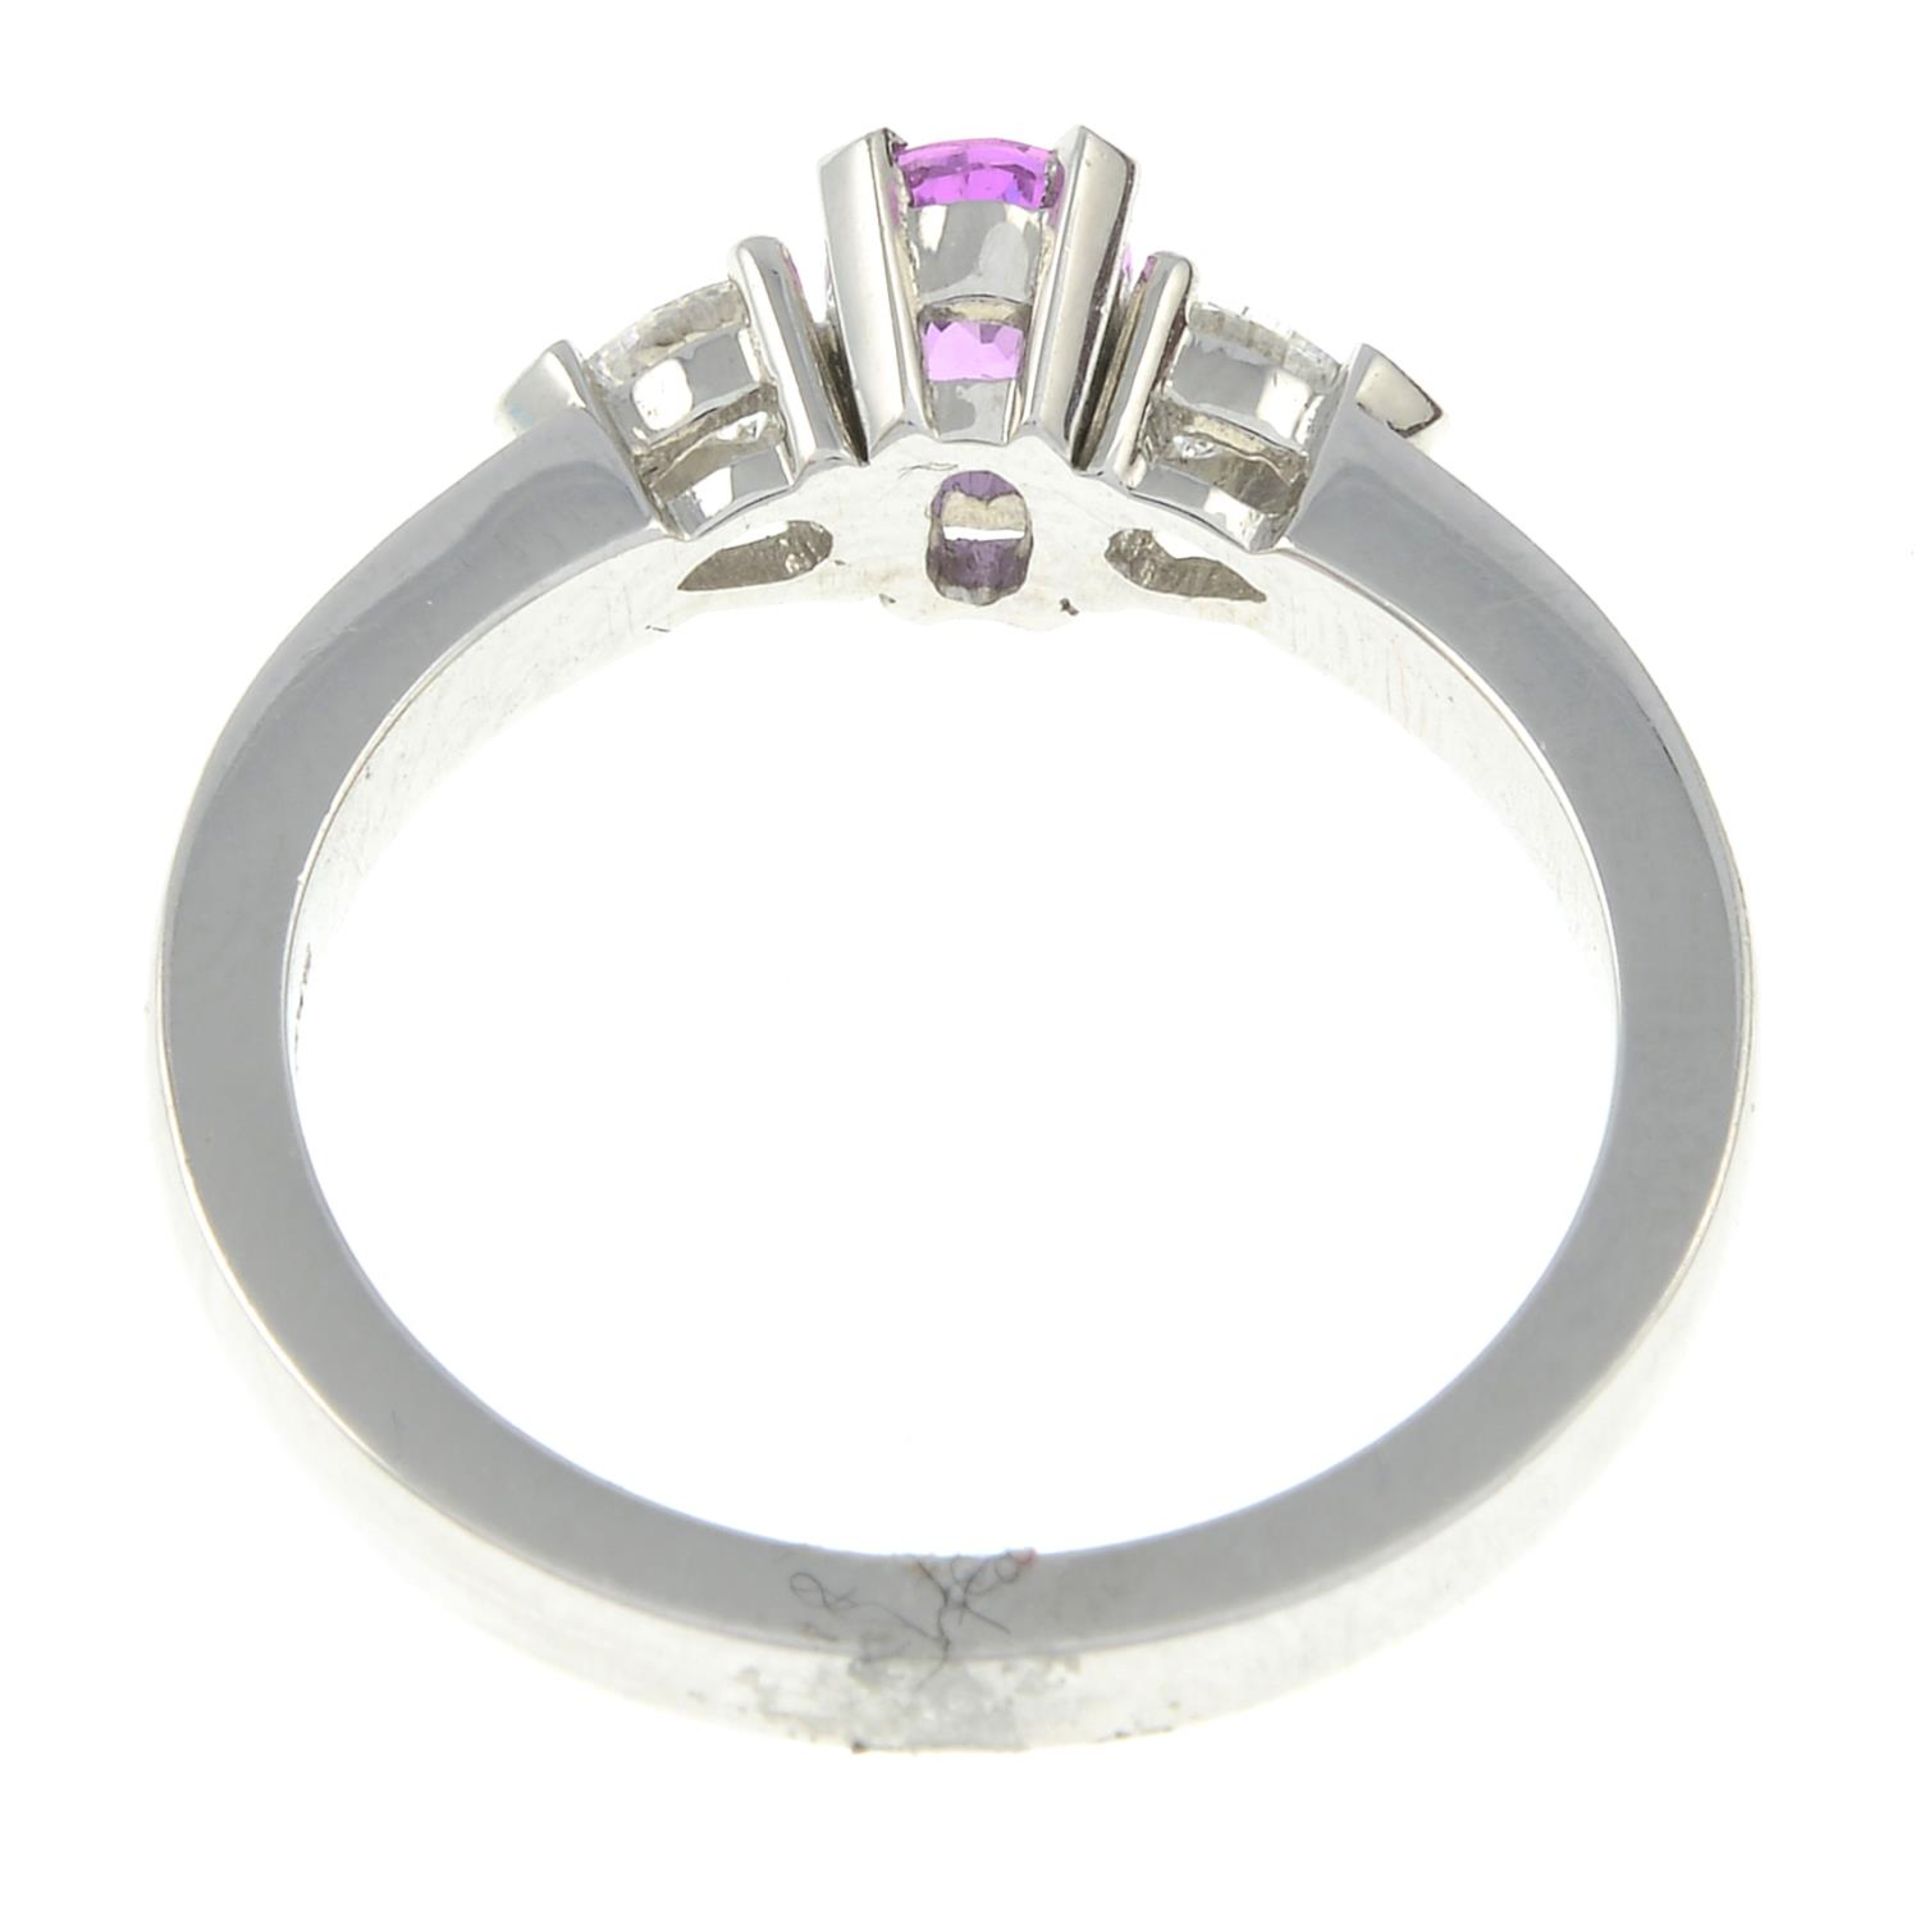 An 18ct gold pink sapphire and diamond three-stone ring.Estimated total diamond weight 0.25ct, - Image 3 of 3